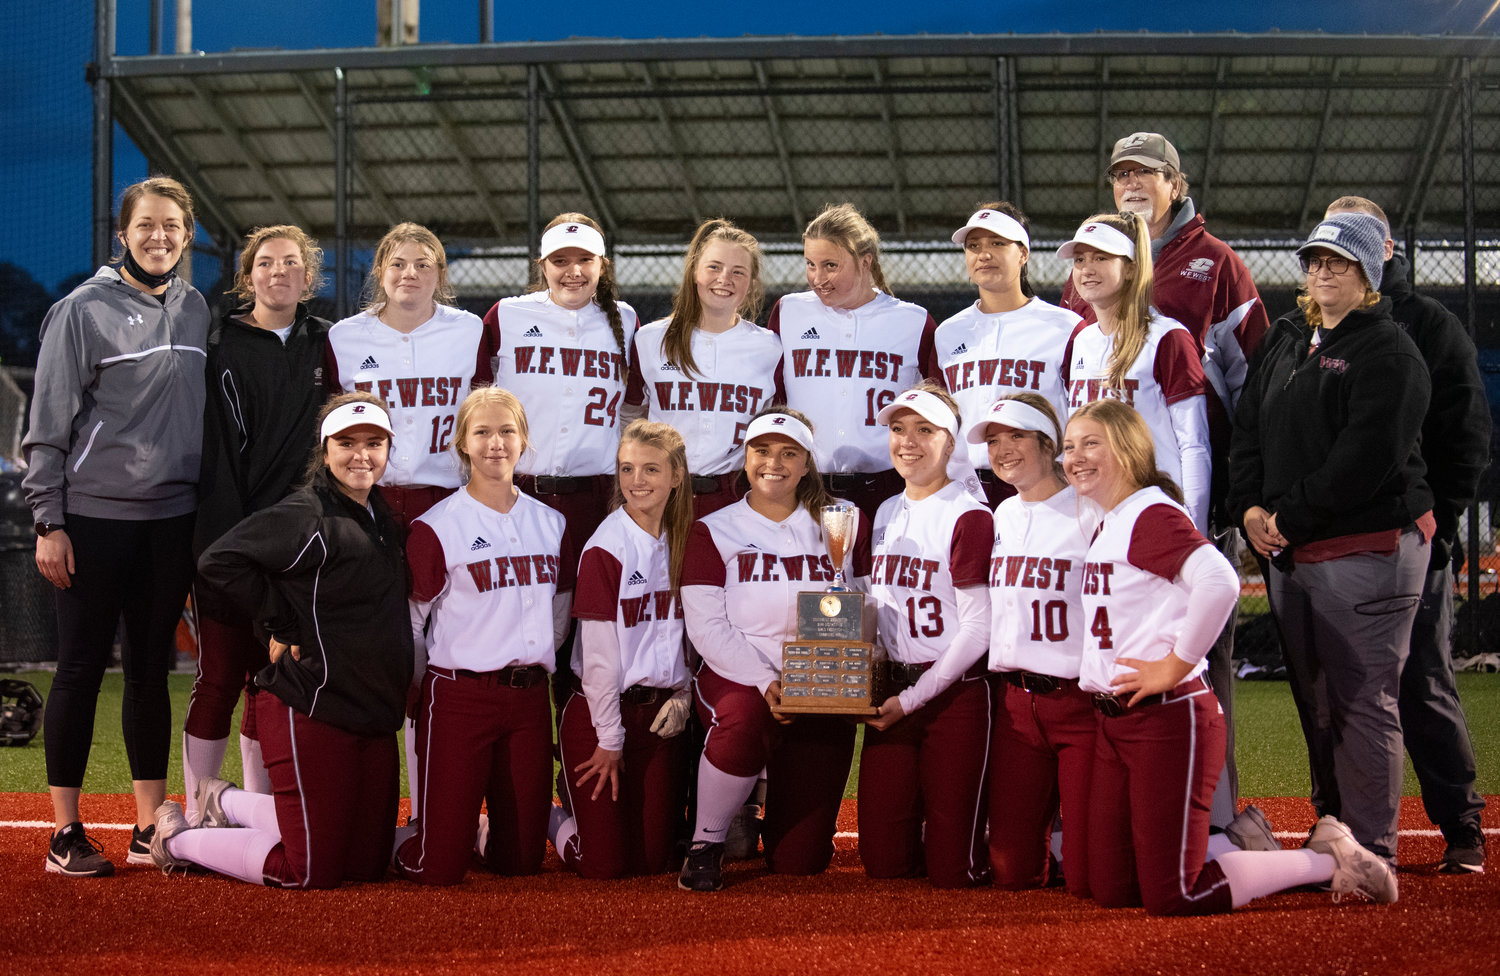 W.F. West softball holds the district championship trophy after defeating league rival Rochester in the title game on Thursday in Chehalis.